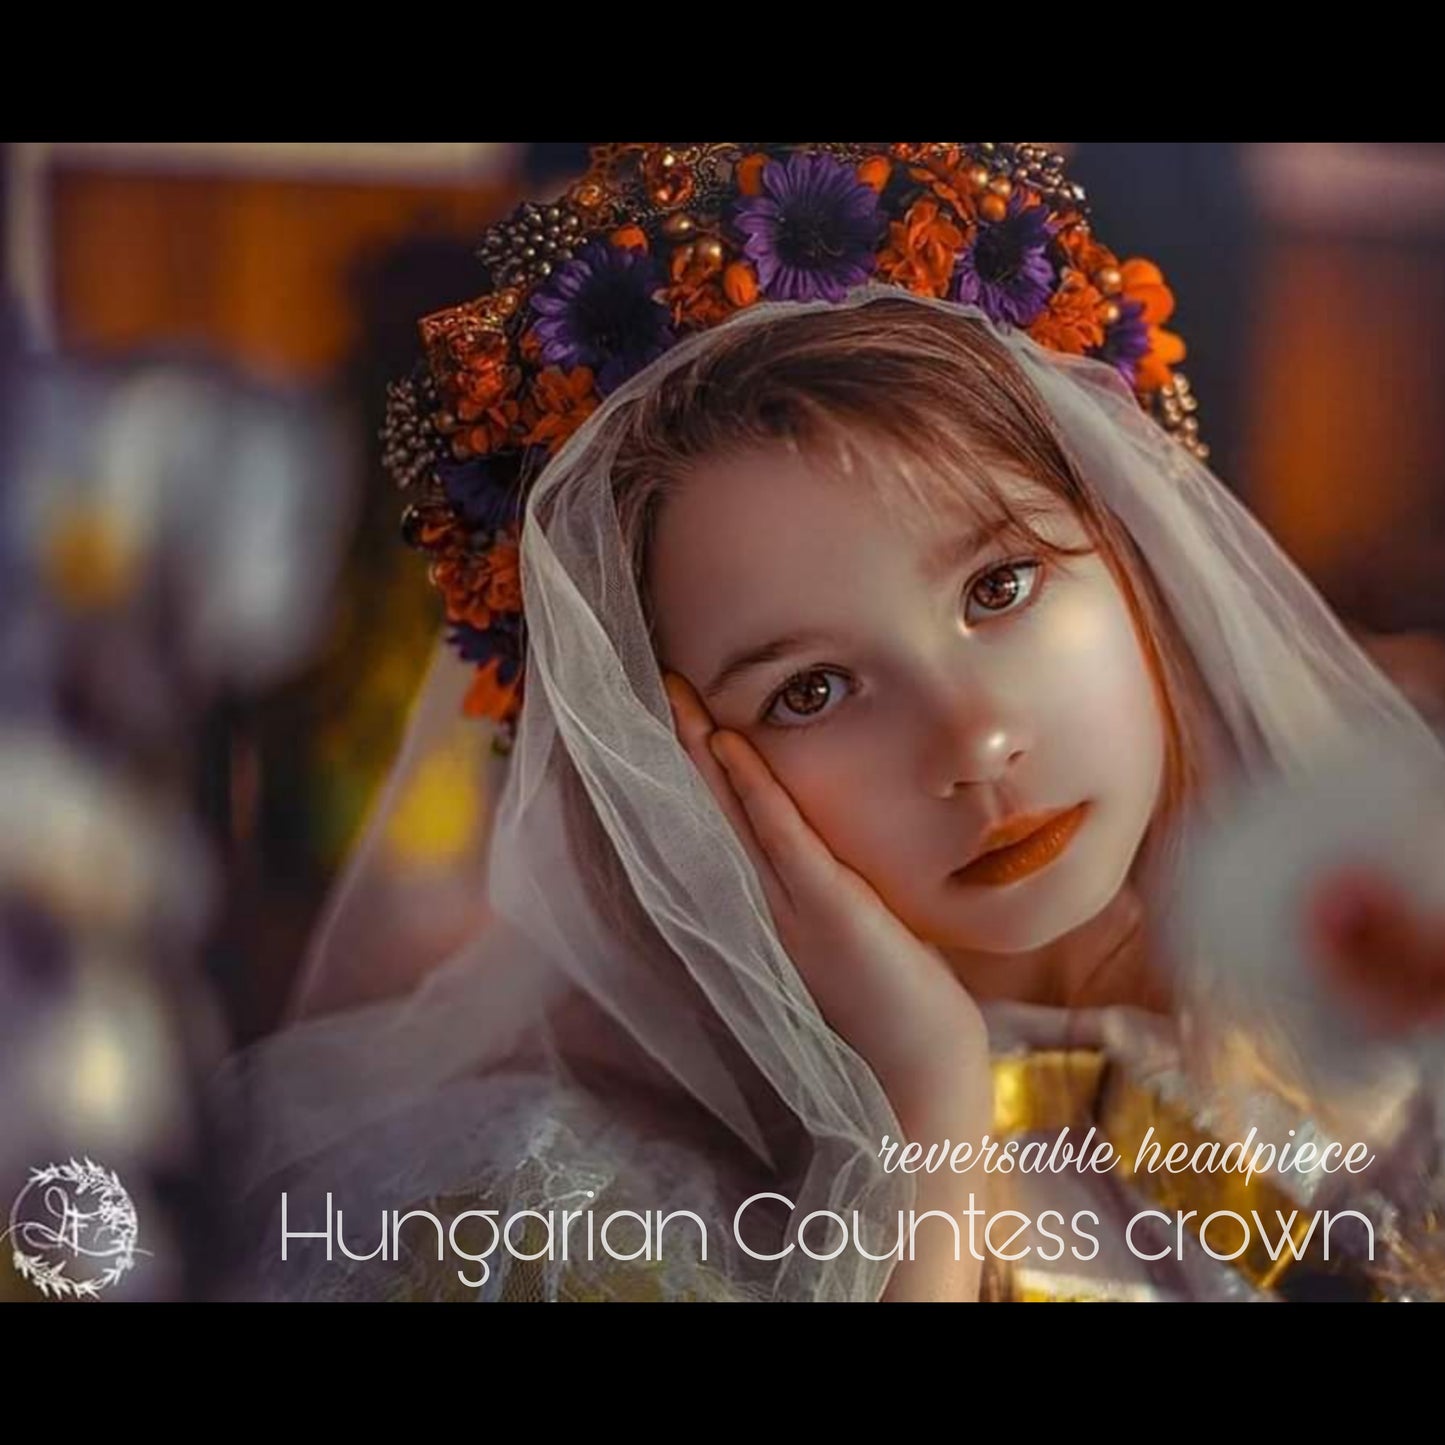 The Hungarian Countess flower crown, reversable headpiece